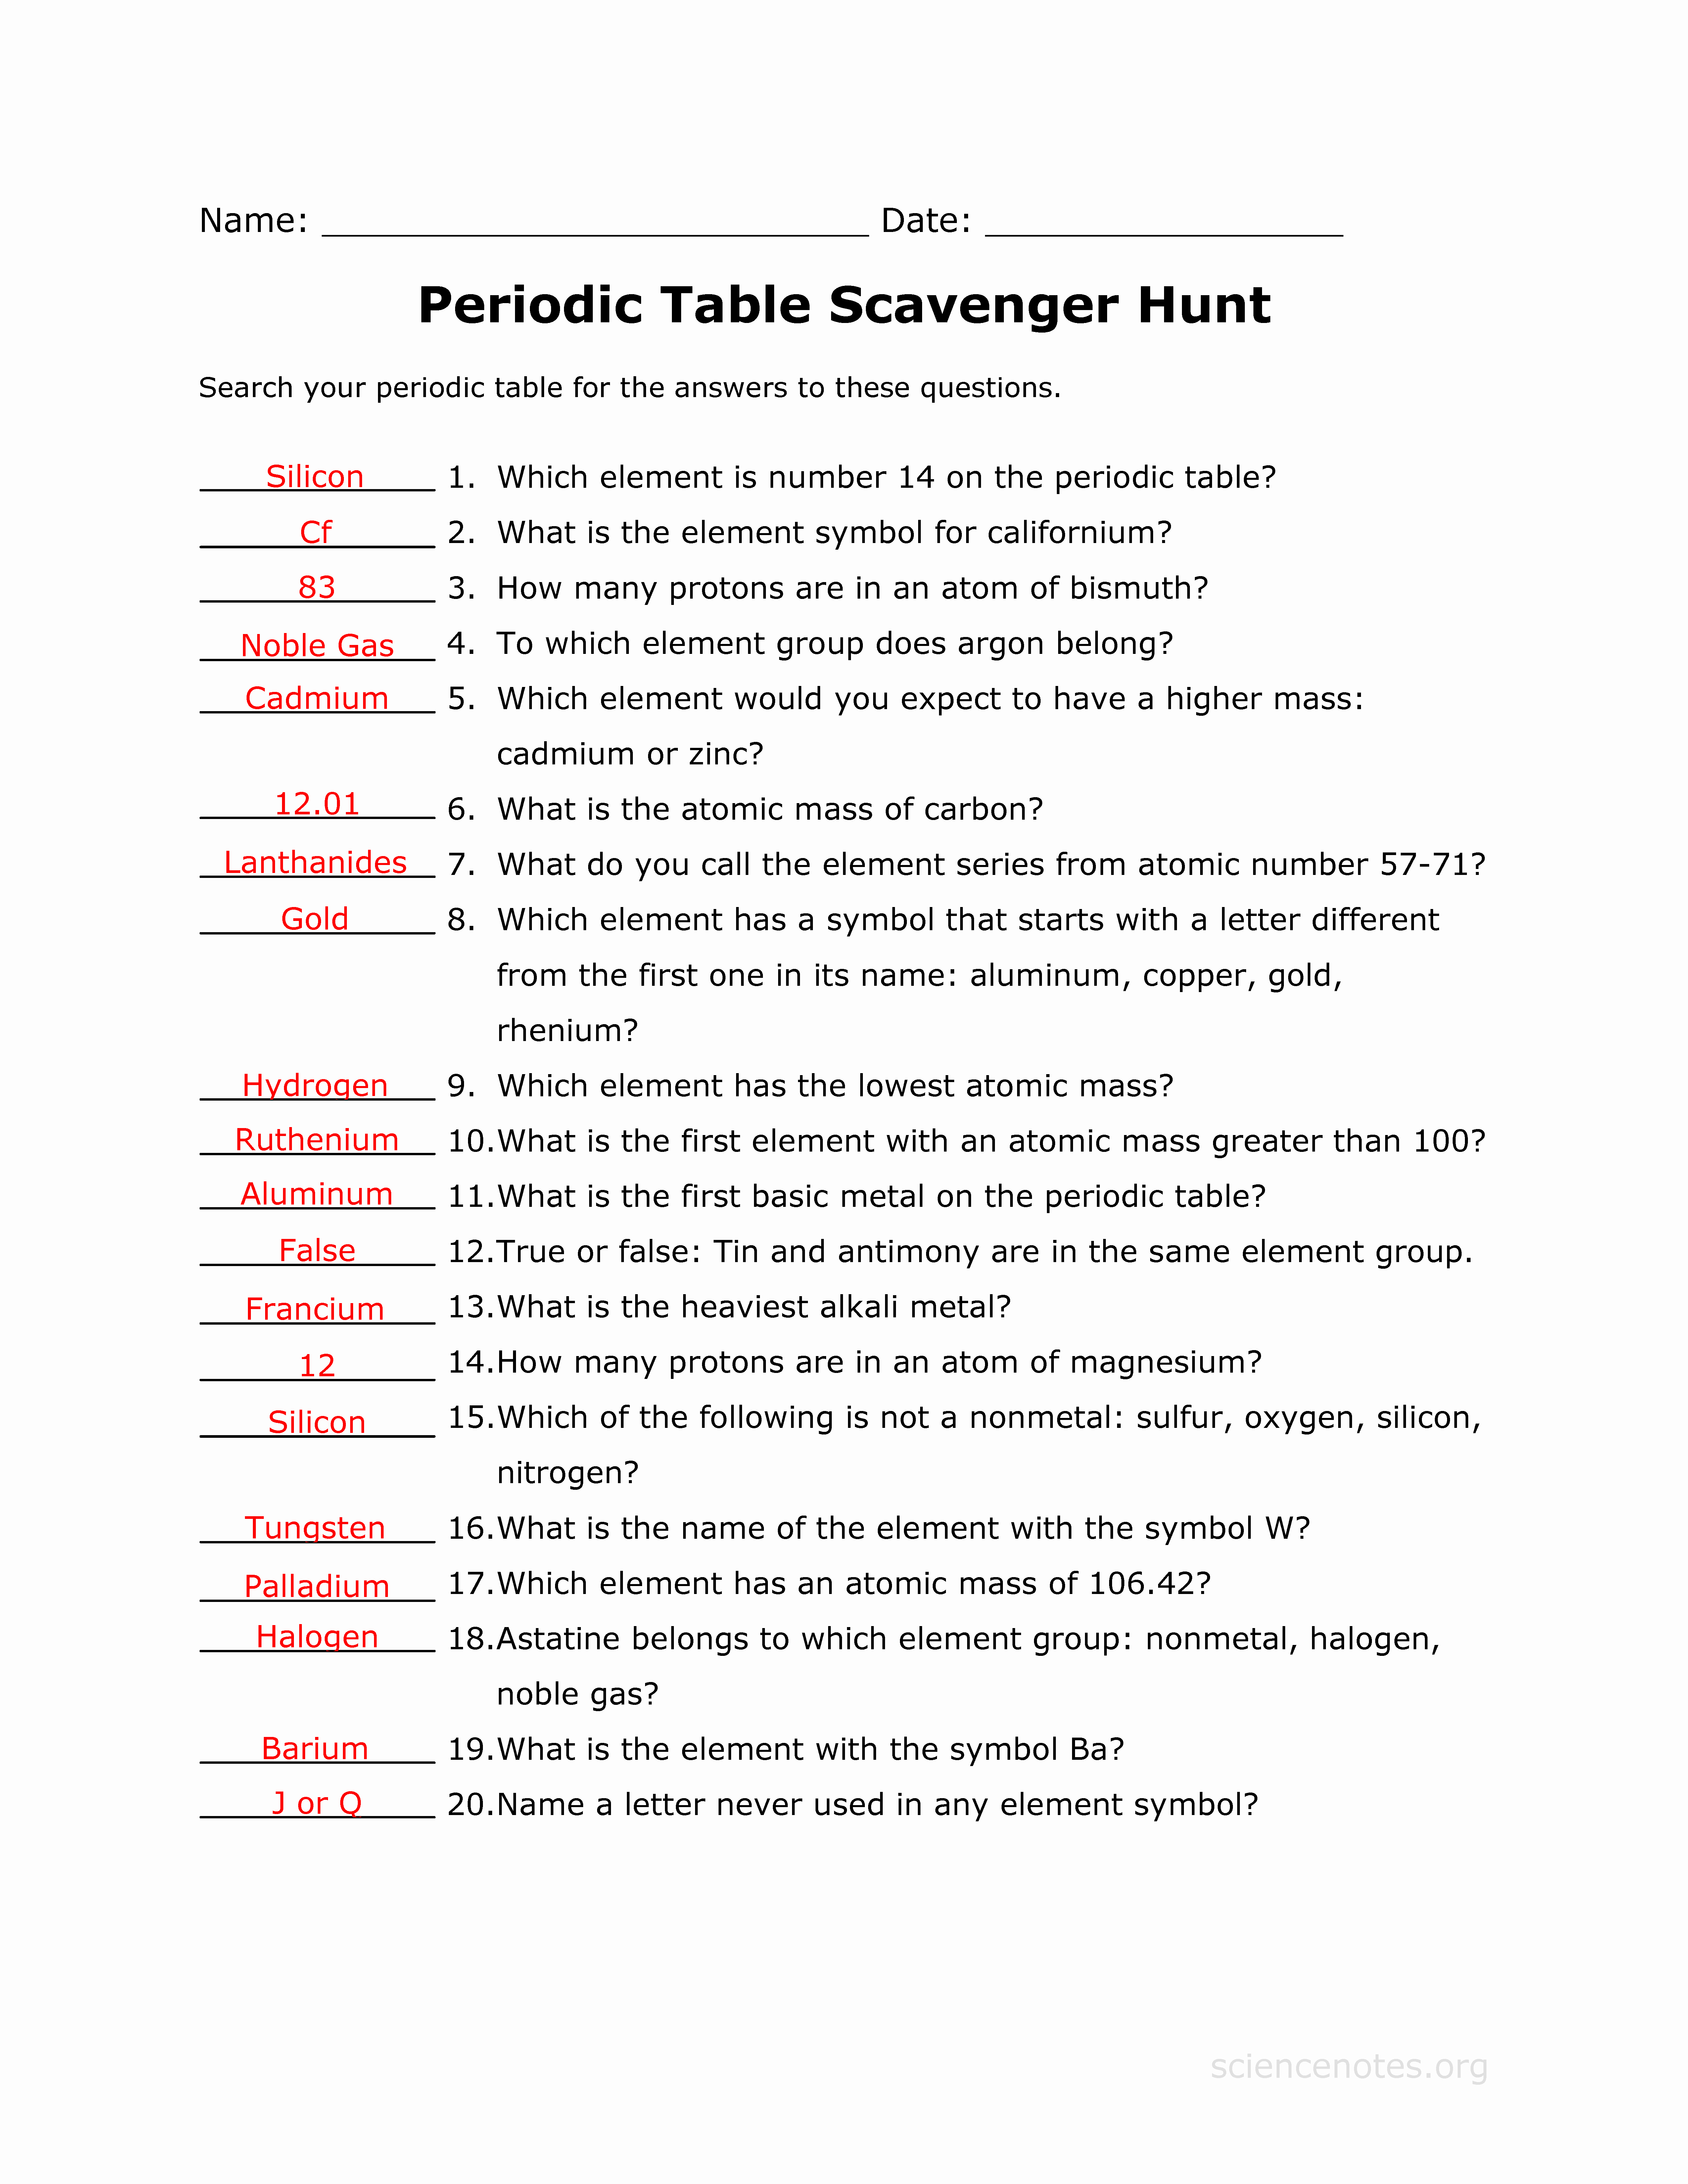 Hunting the Elements Worksheet Luxury Periodic Table Scavenger Hunt Answer Key Science Notes